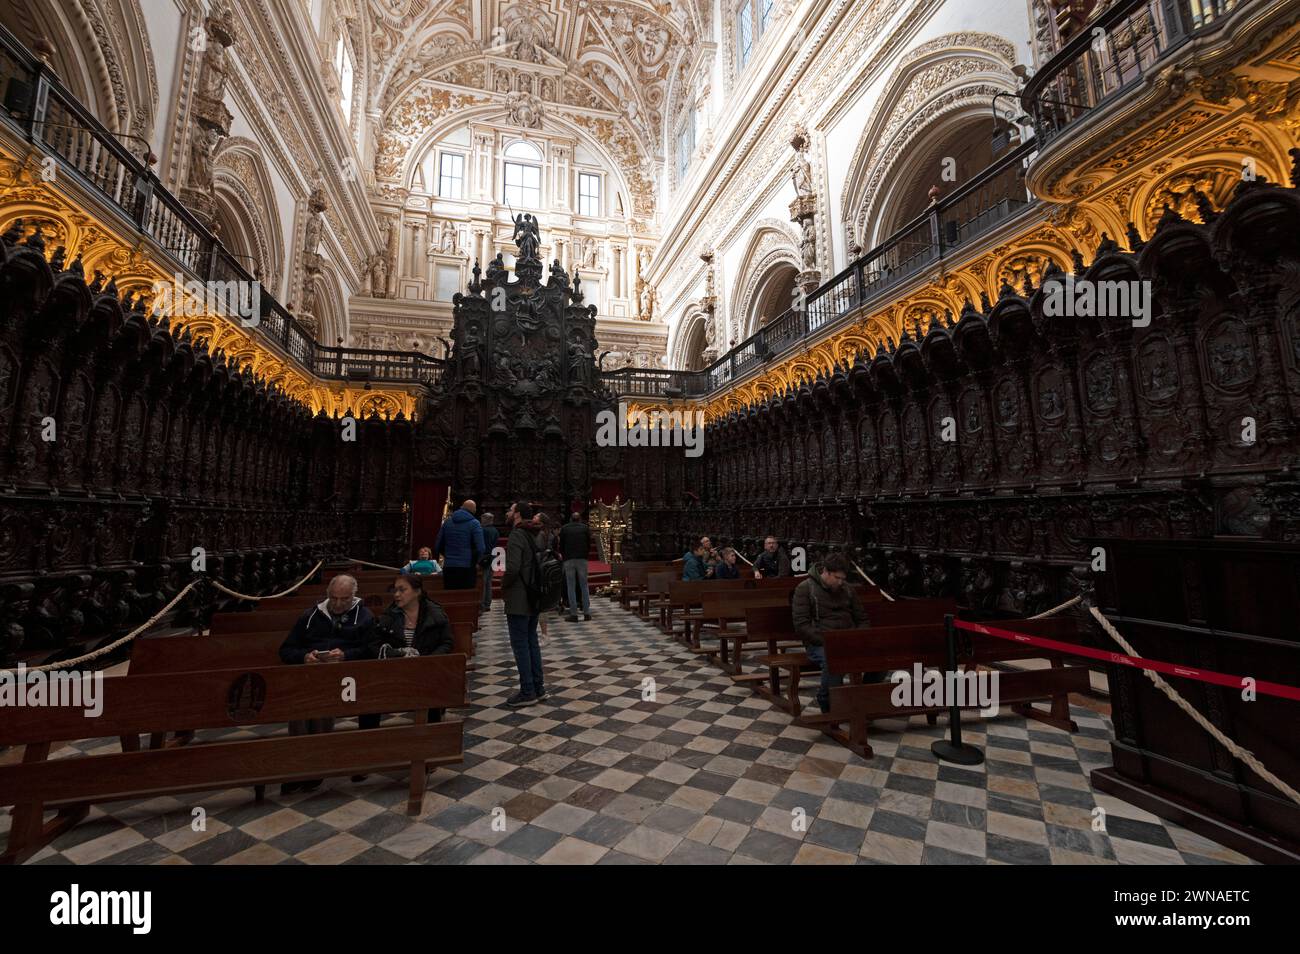 Mosque/ Cathedral of Cordoba  The Choir stalls carved by sculptor Pedro Duque Cornejo are made of mahogany wood which is a Baroque masterpiece imported Stock Photo